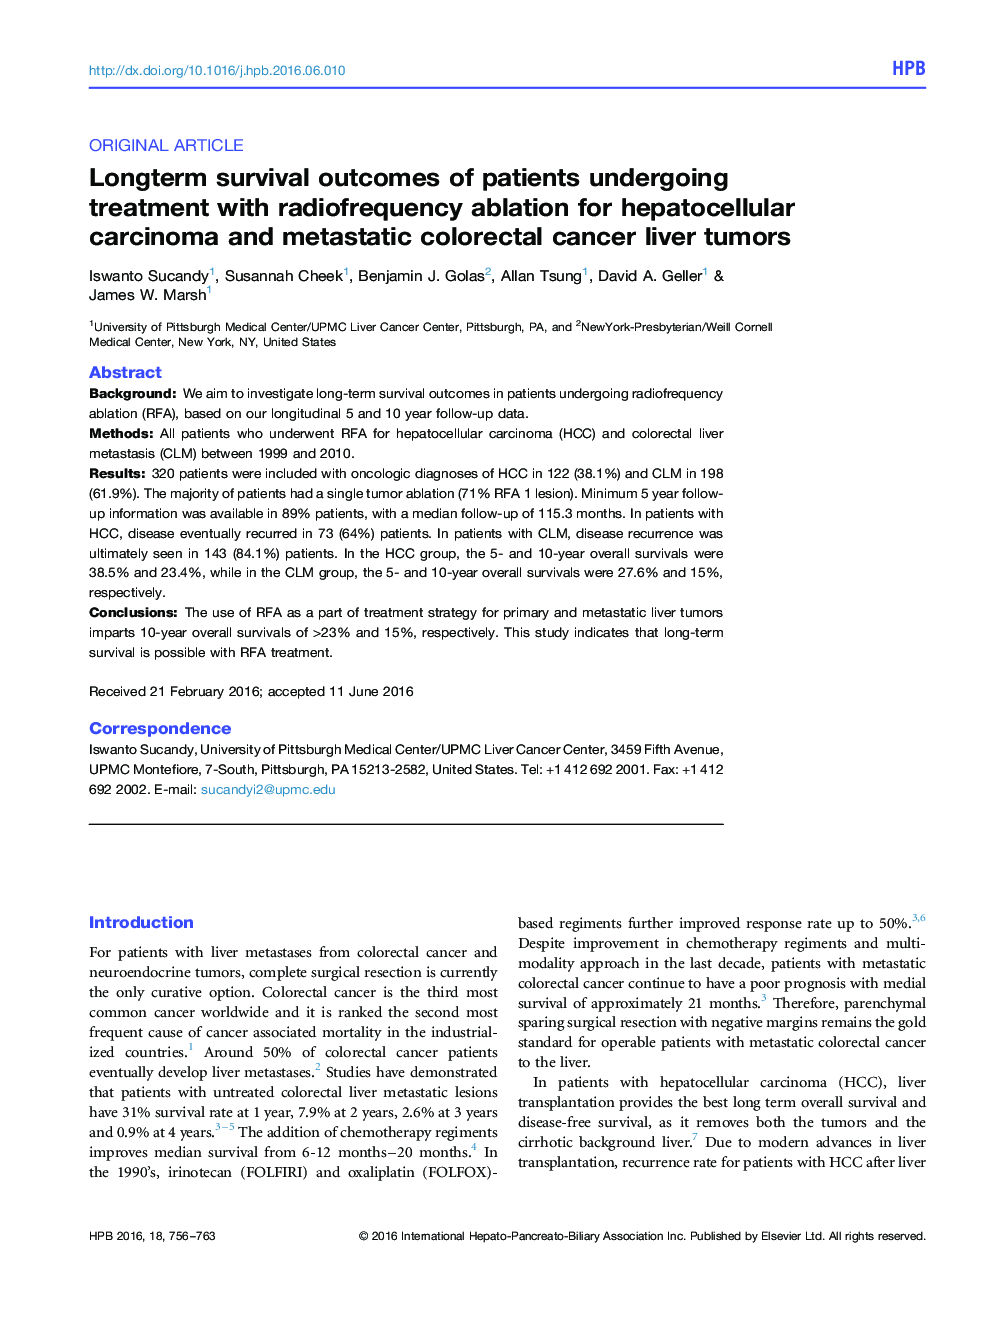 Longterm survival outcomes of patients undergoing treatment with radiofrequency ablation for hepatocellular carcinoma and metastatic colorectal cancer liver tumors